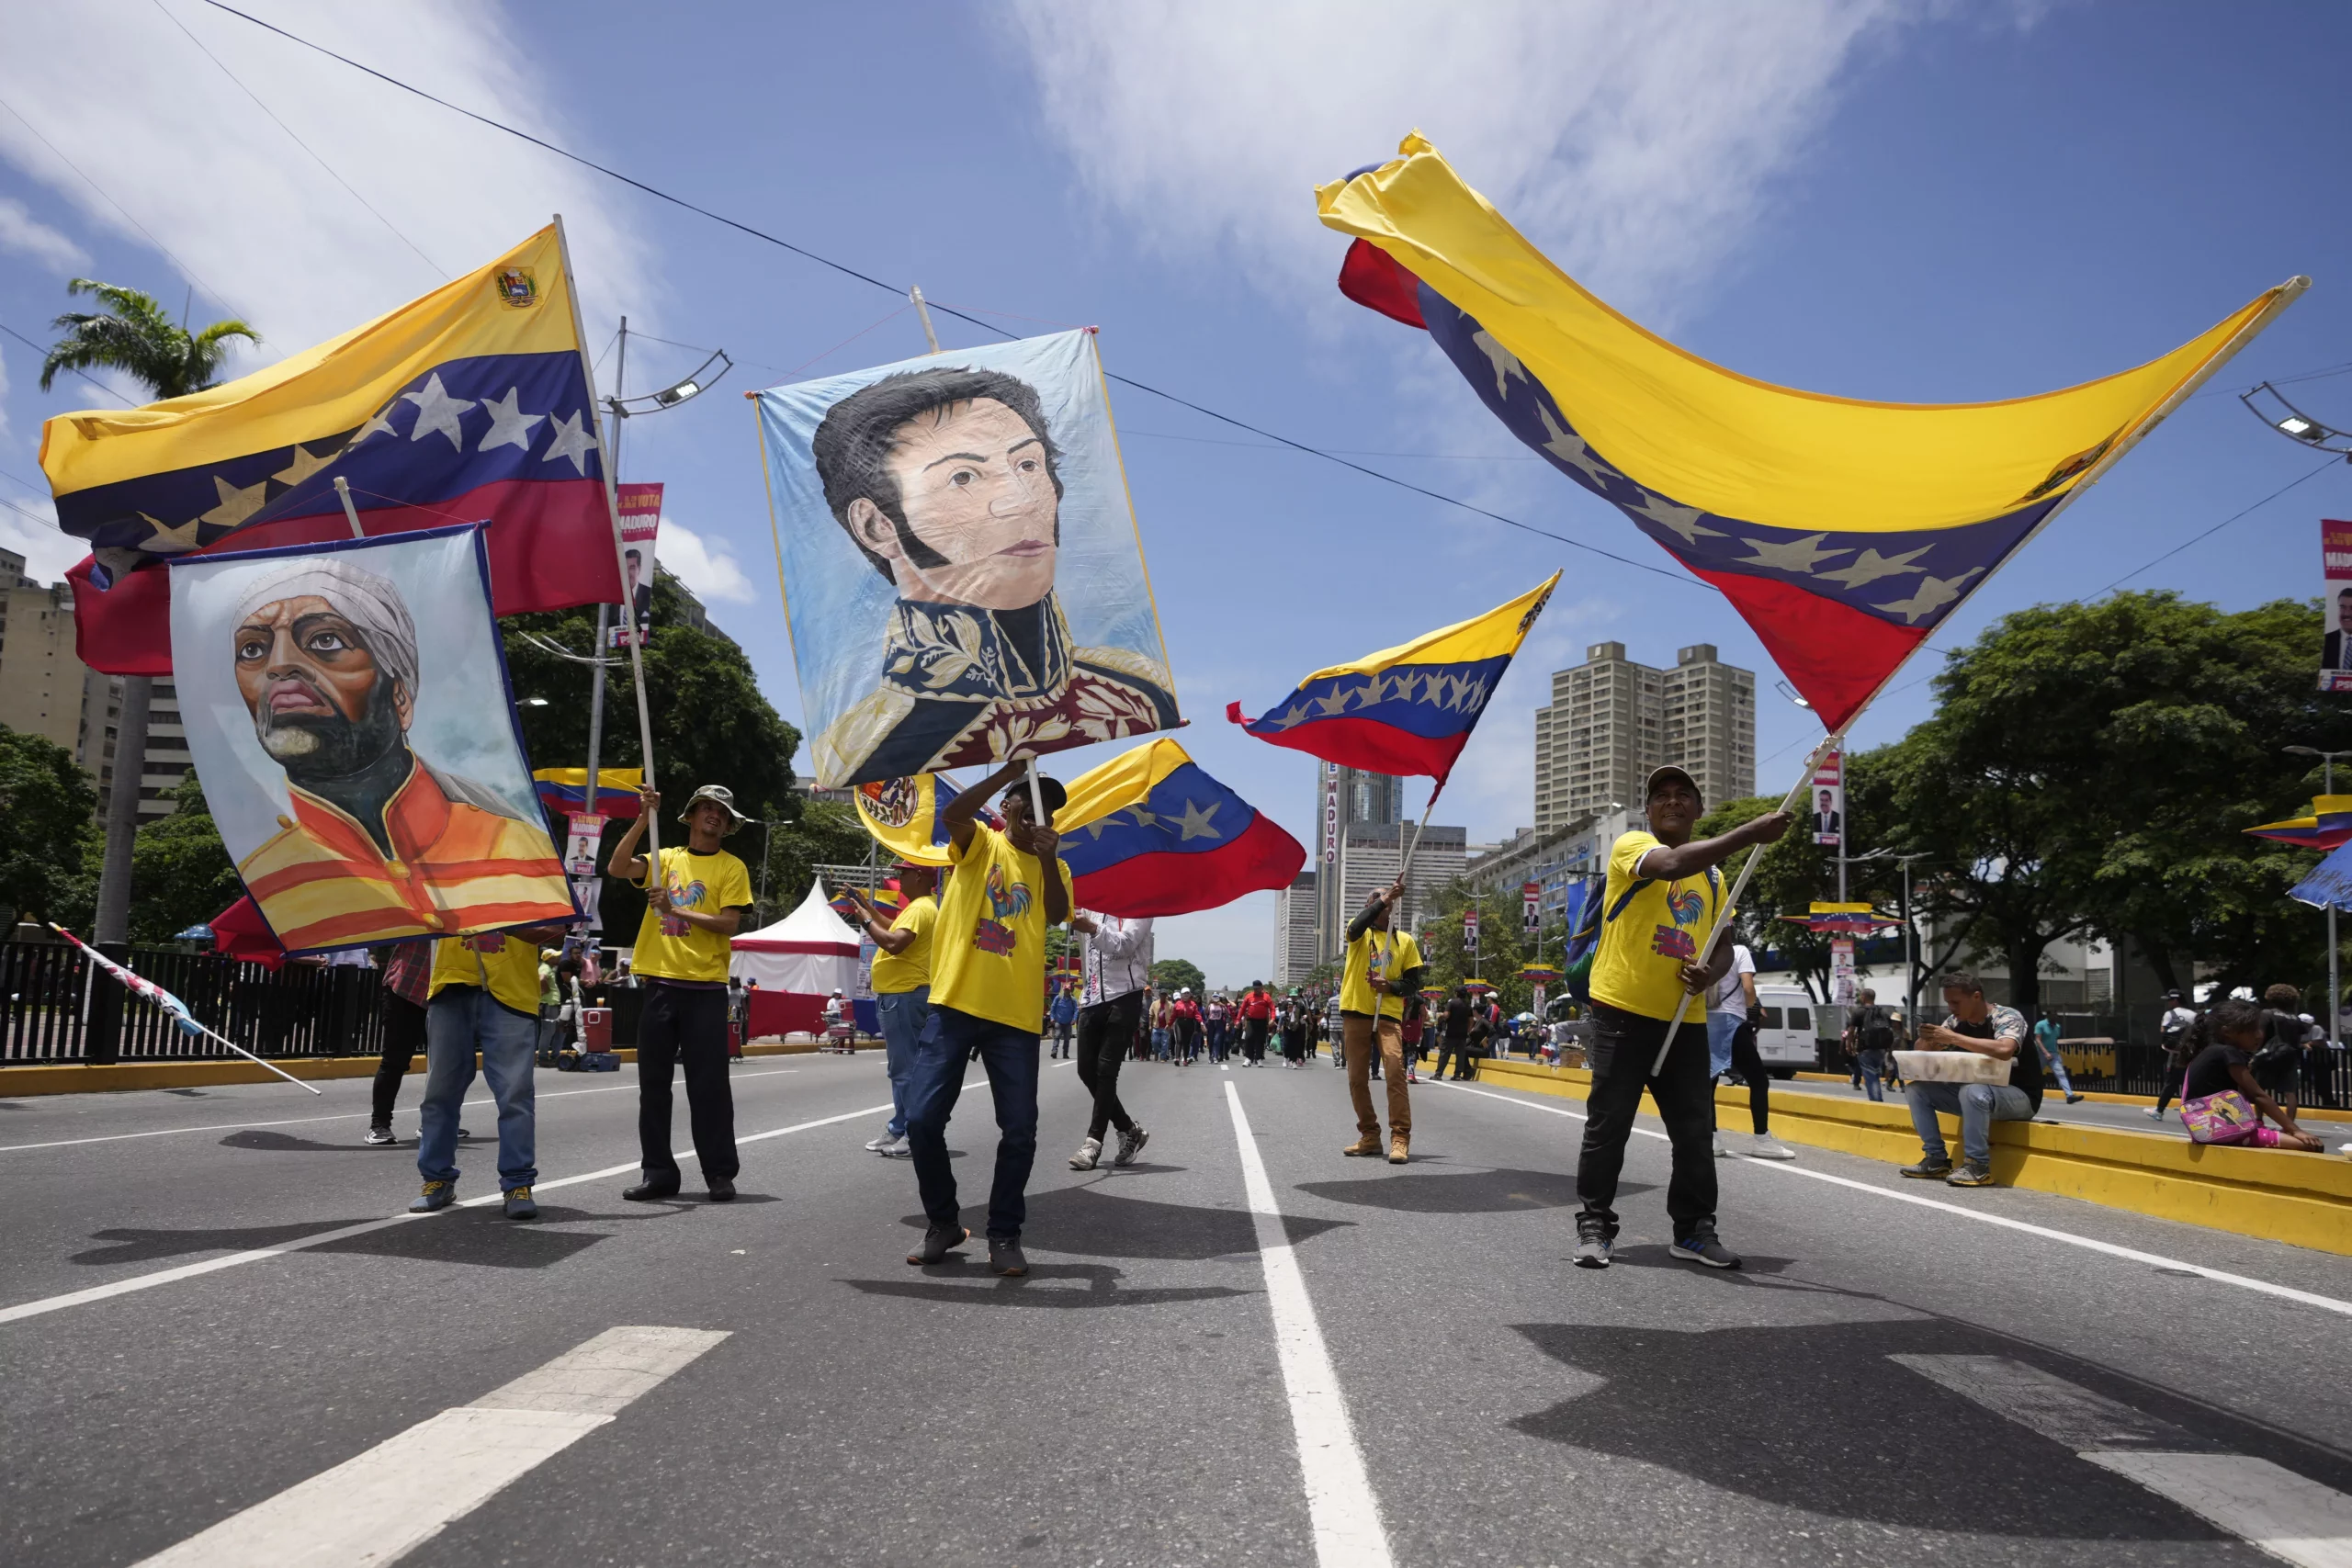 Venezuela’s election is an opportunity for the US